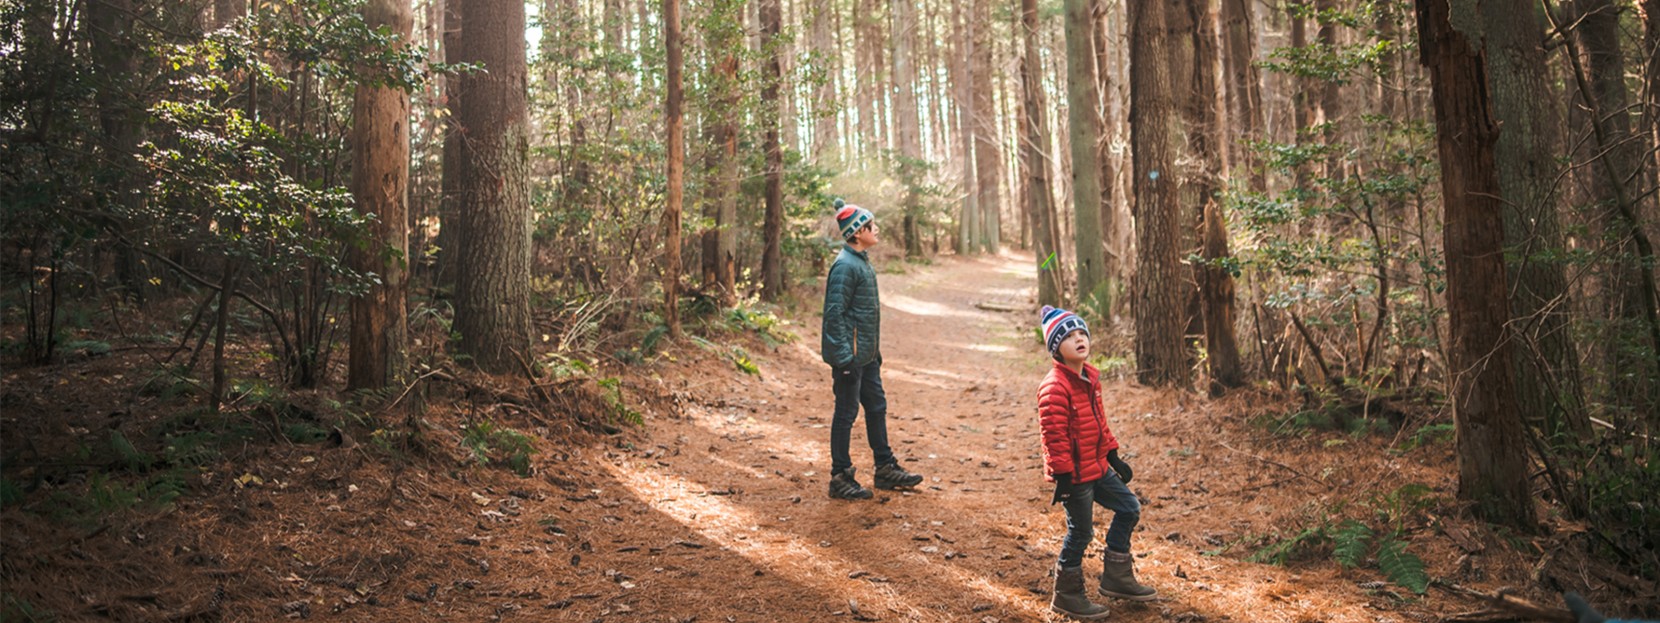 Two children on a pine needle-covered path in the woods, looking up into the trees.